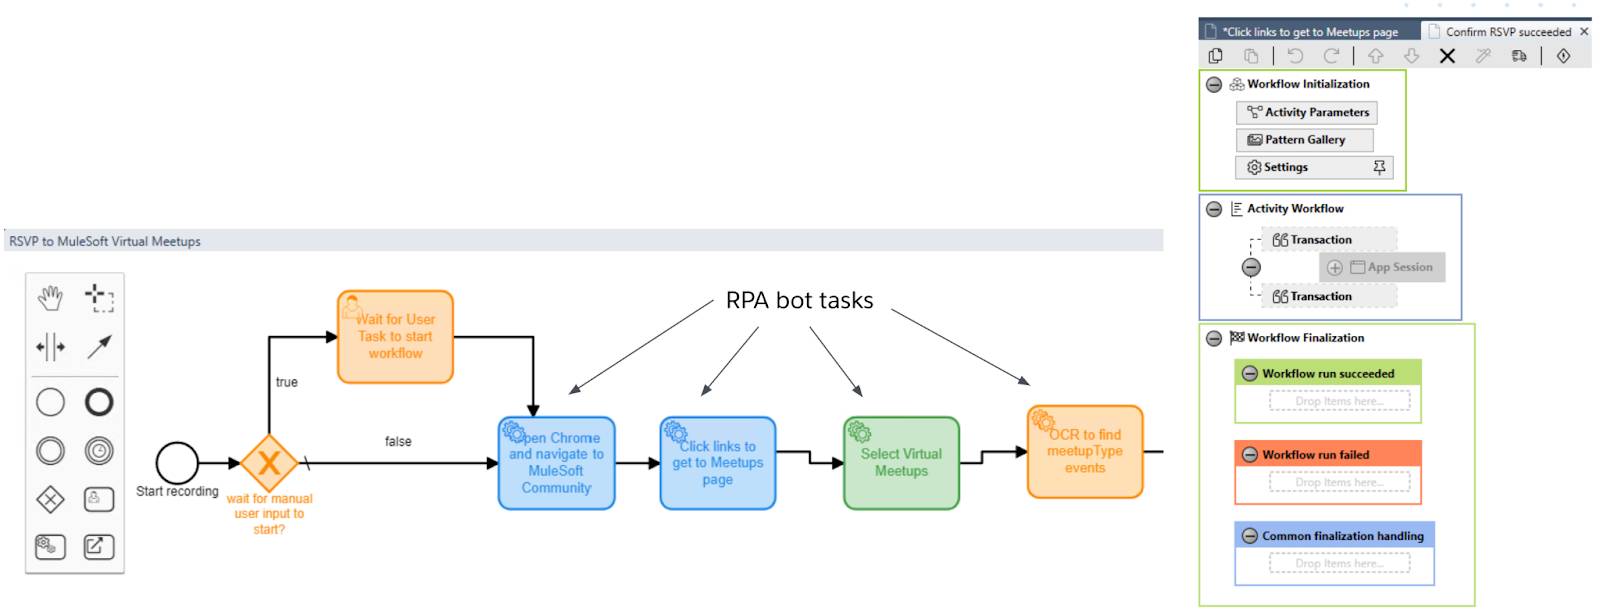 RPA process flow showing BPMN diagram, along with an RPA Bot Task workflow.